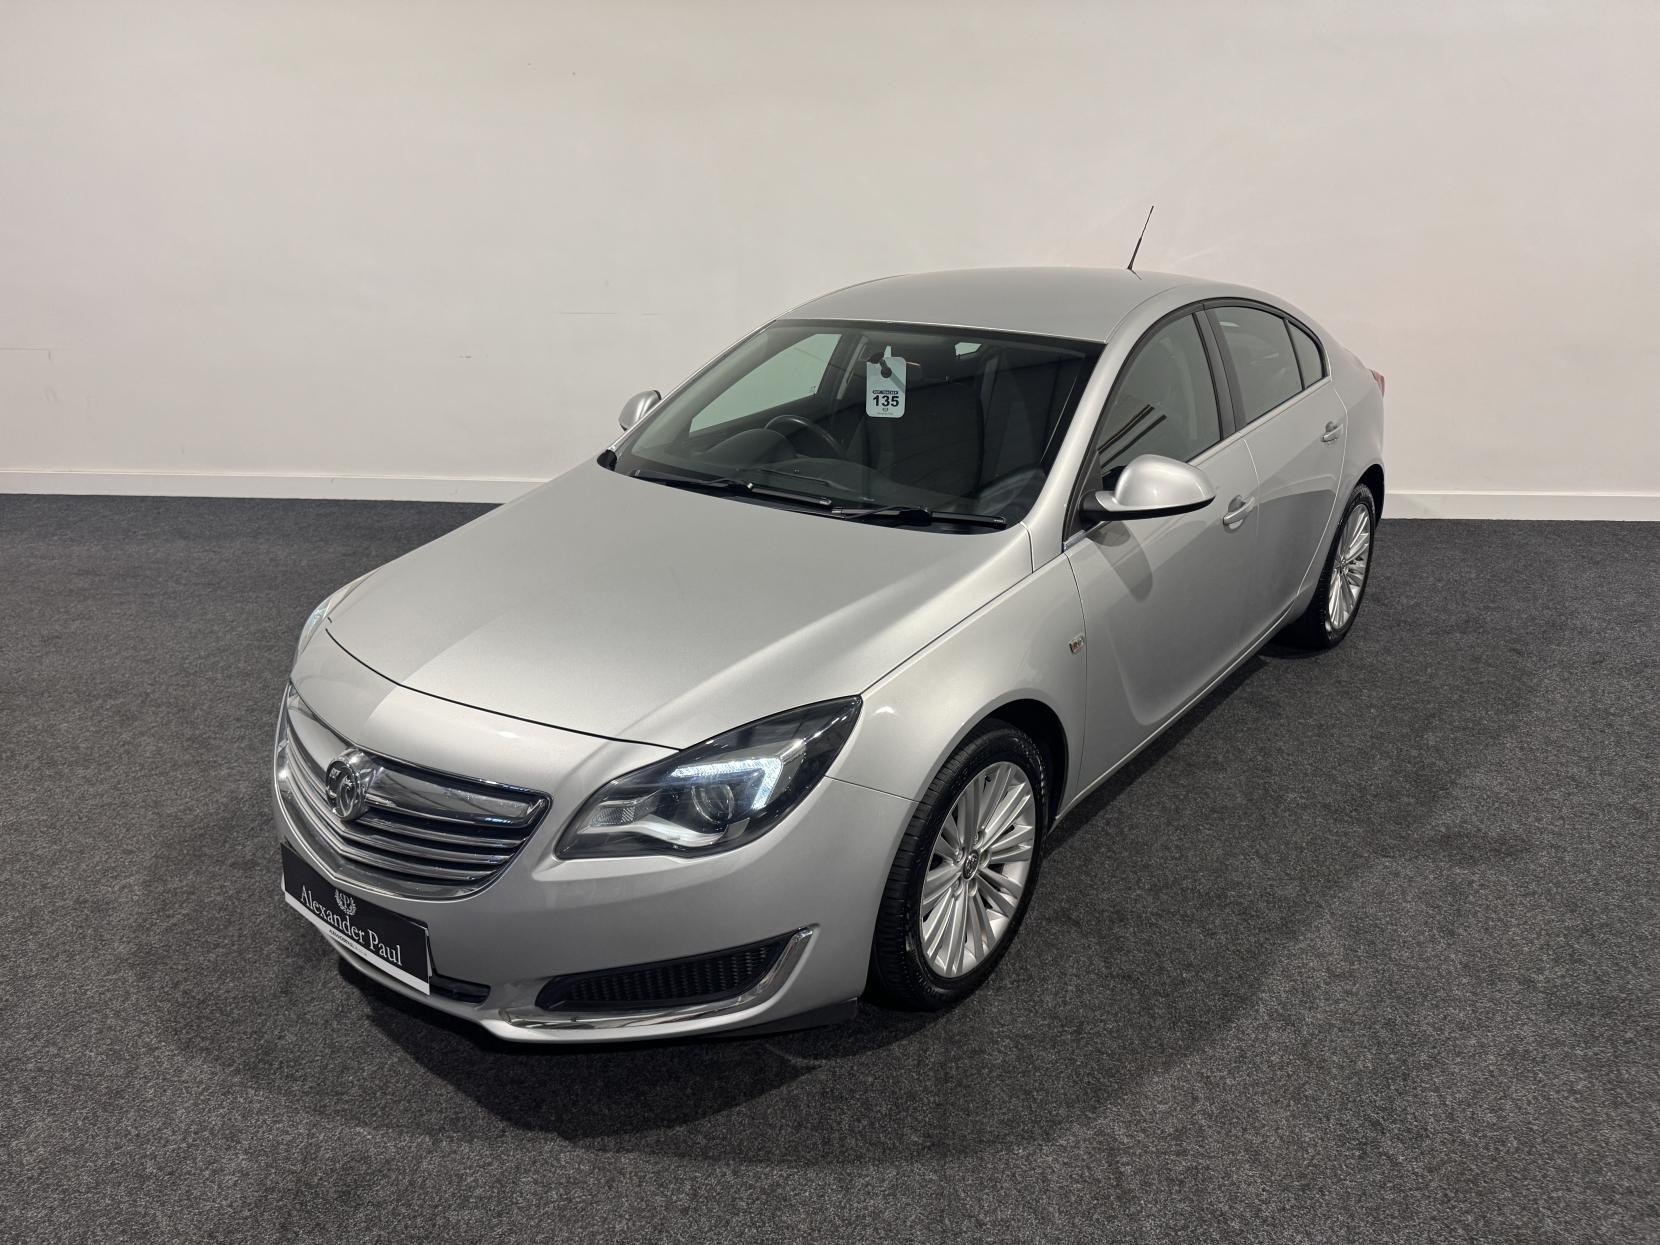 Vauxhall Insignia 2.0 CDTi Energy Hatchback 5dr Diesel Manual Euro 5 (130 ps)